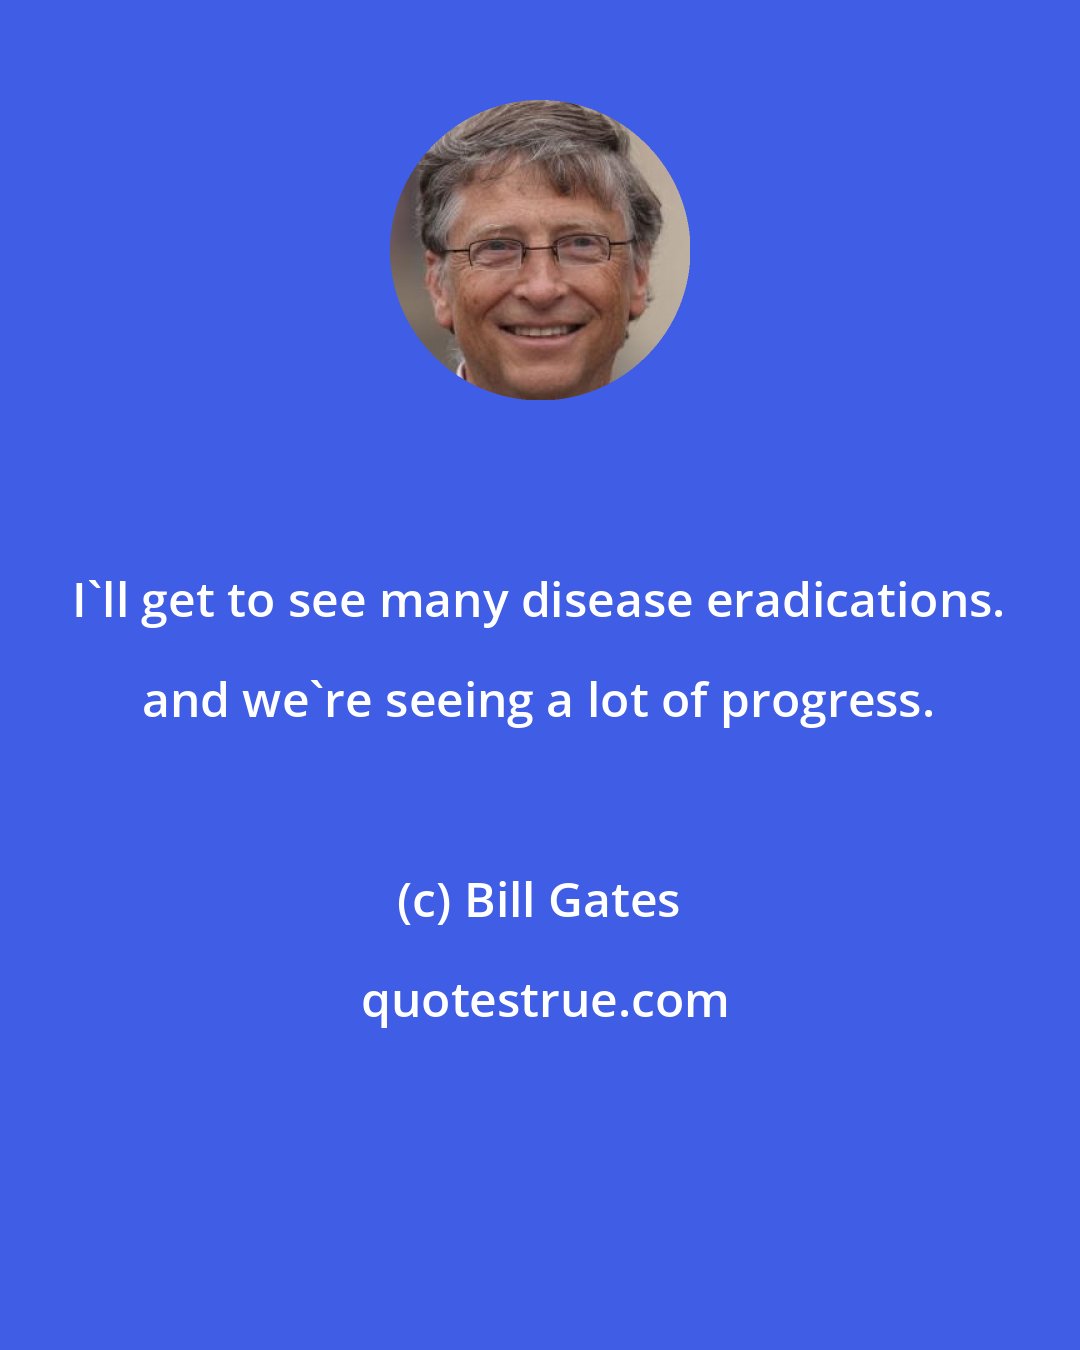 Bill Gates: I'll get to see many disease eradications. and we're seeing a lot of progress.